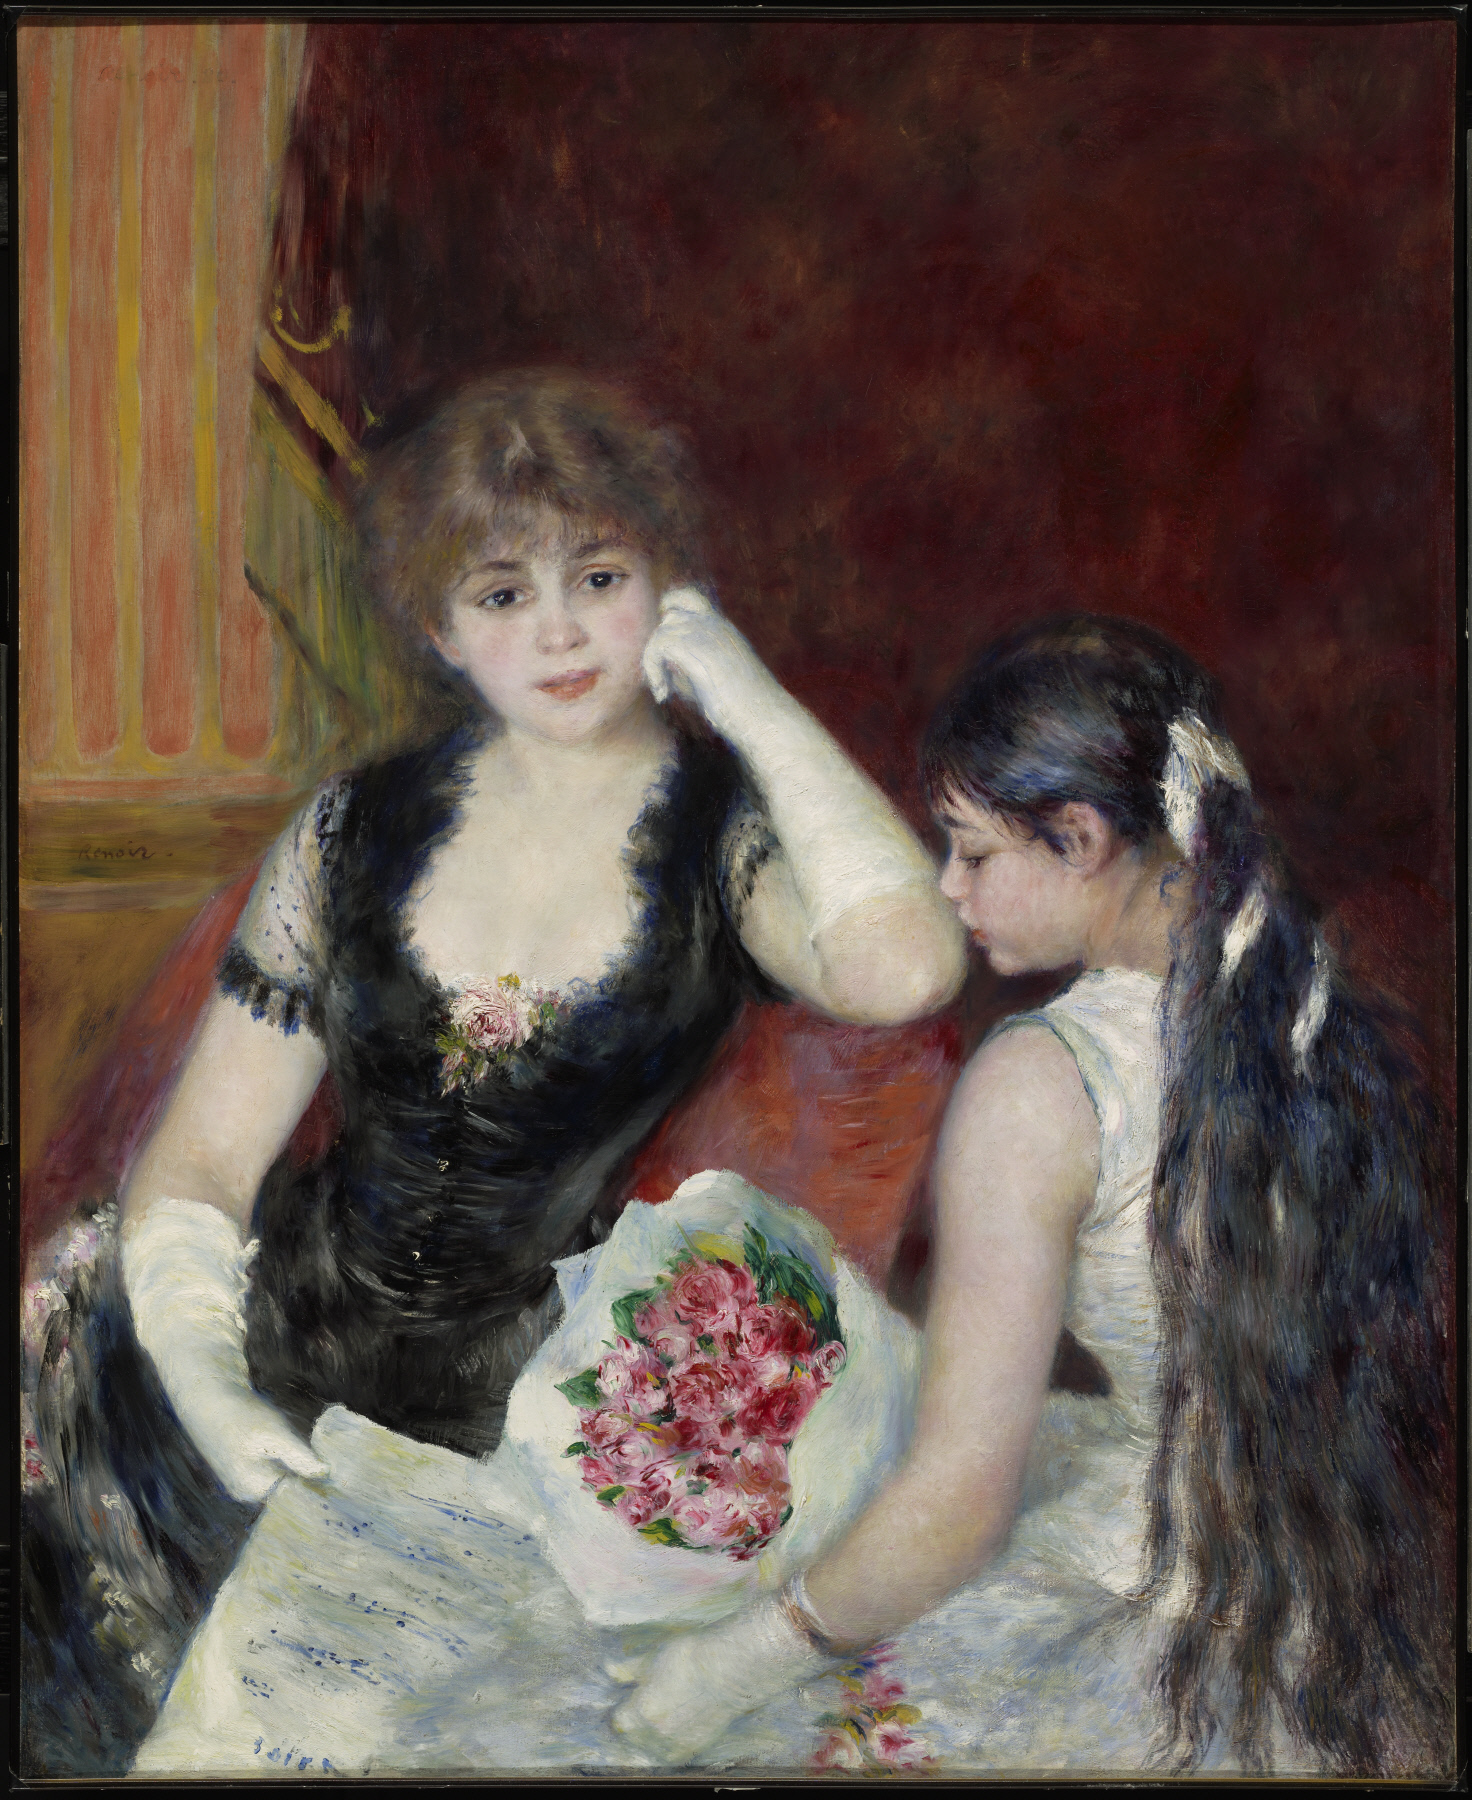 A box at the theater (공연장의 박스칸) by Pierre-Auguste Renoir - 1880 - 99.4 x 80.7 cm 